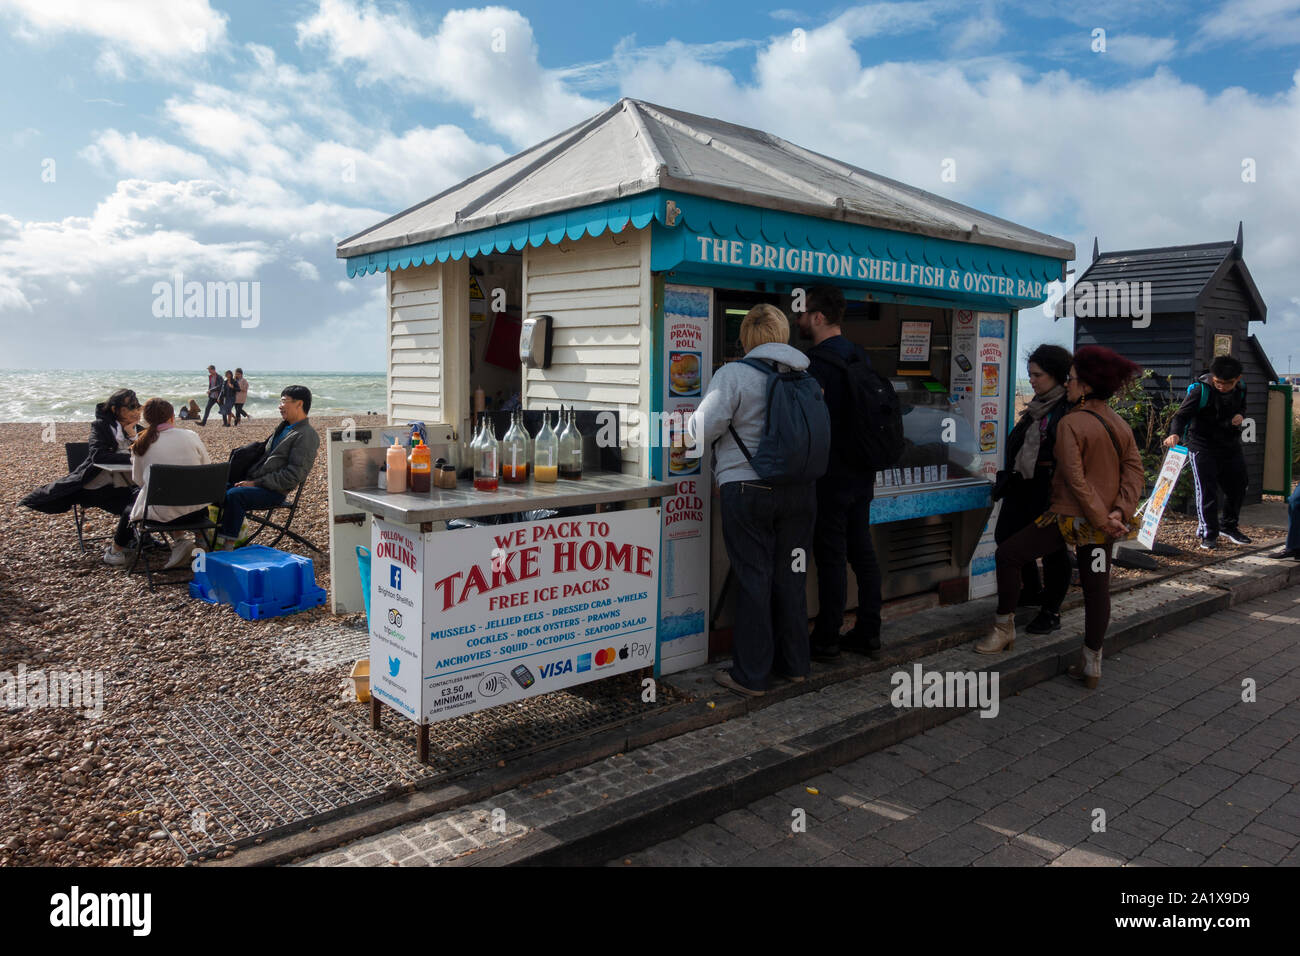 People queueing up for seafood at The Brighton Shellfish and Oyster Bar. Brighton, Sussex, England, UK Stock Photo